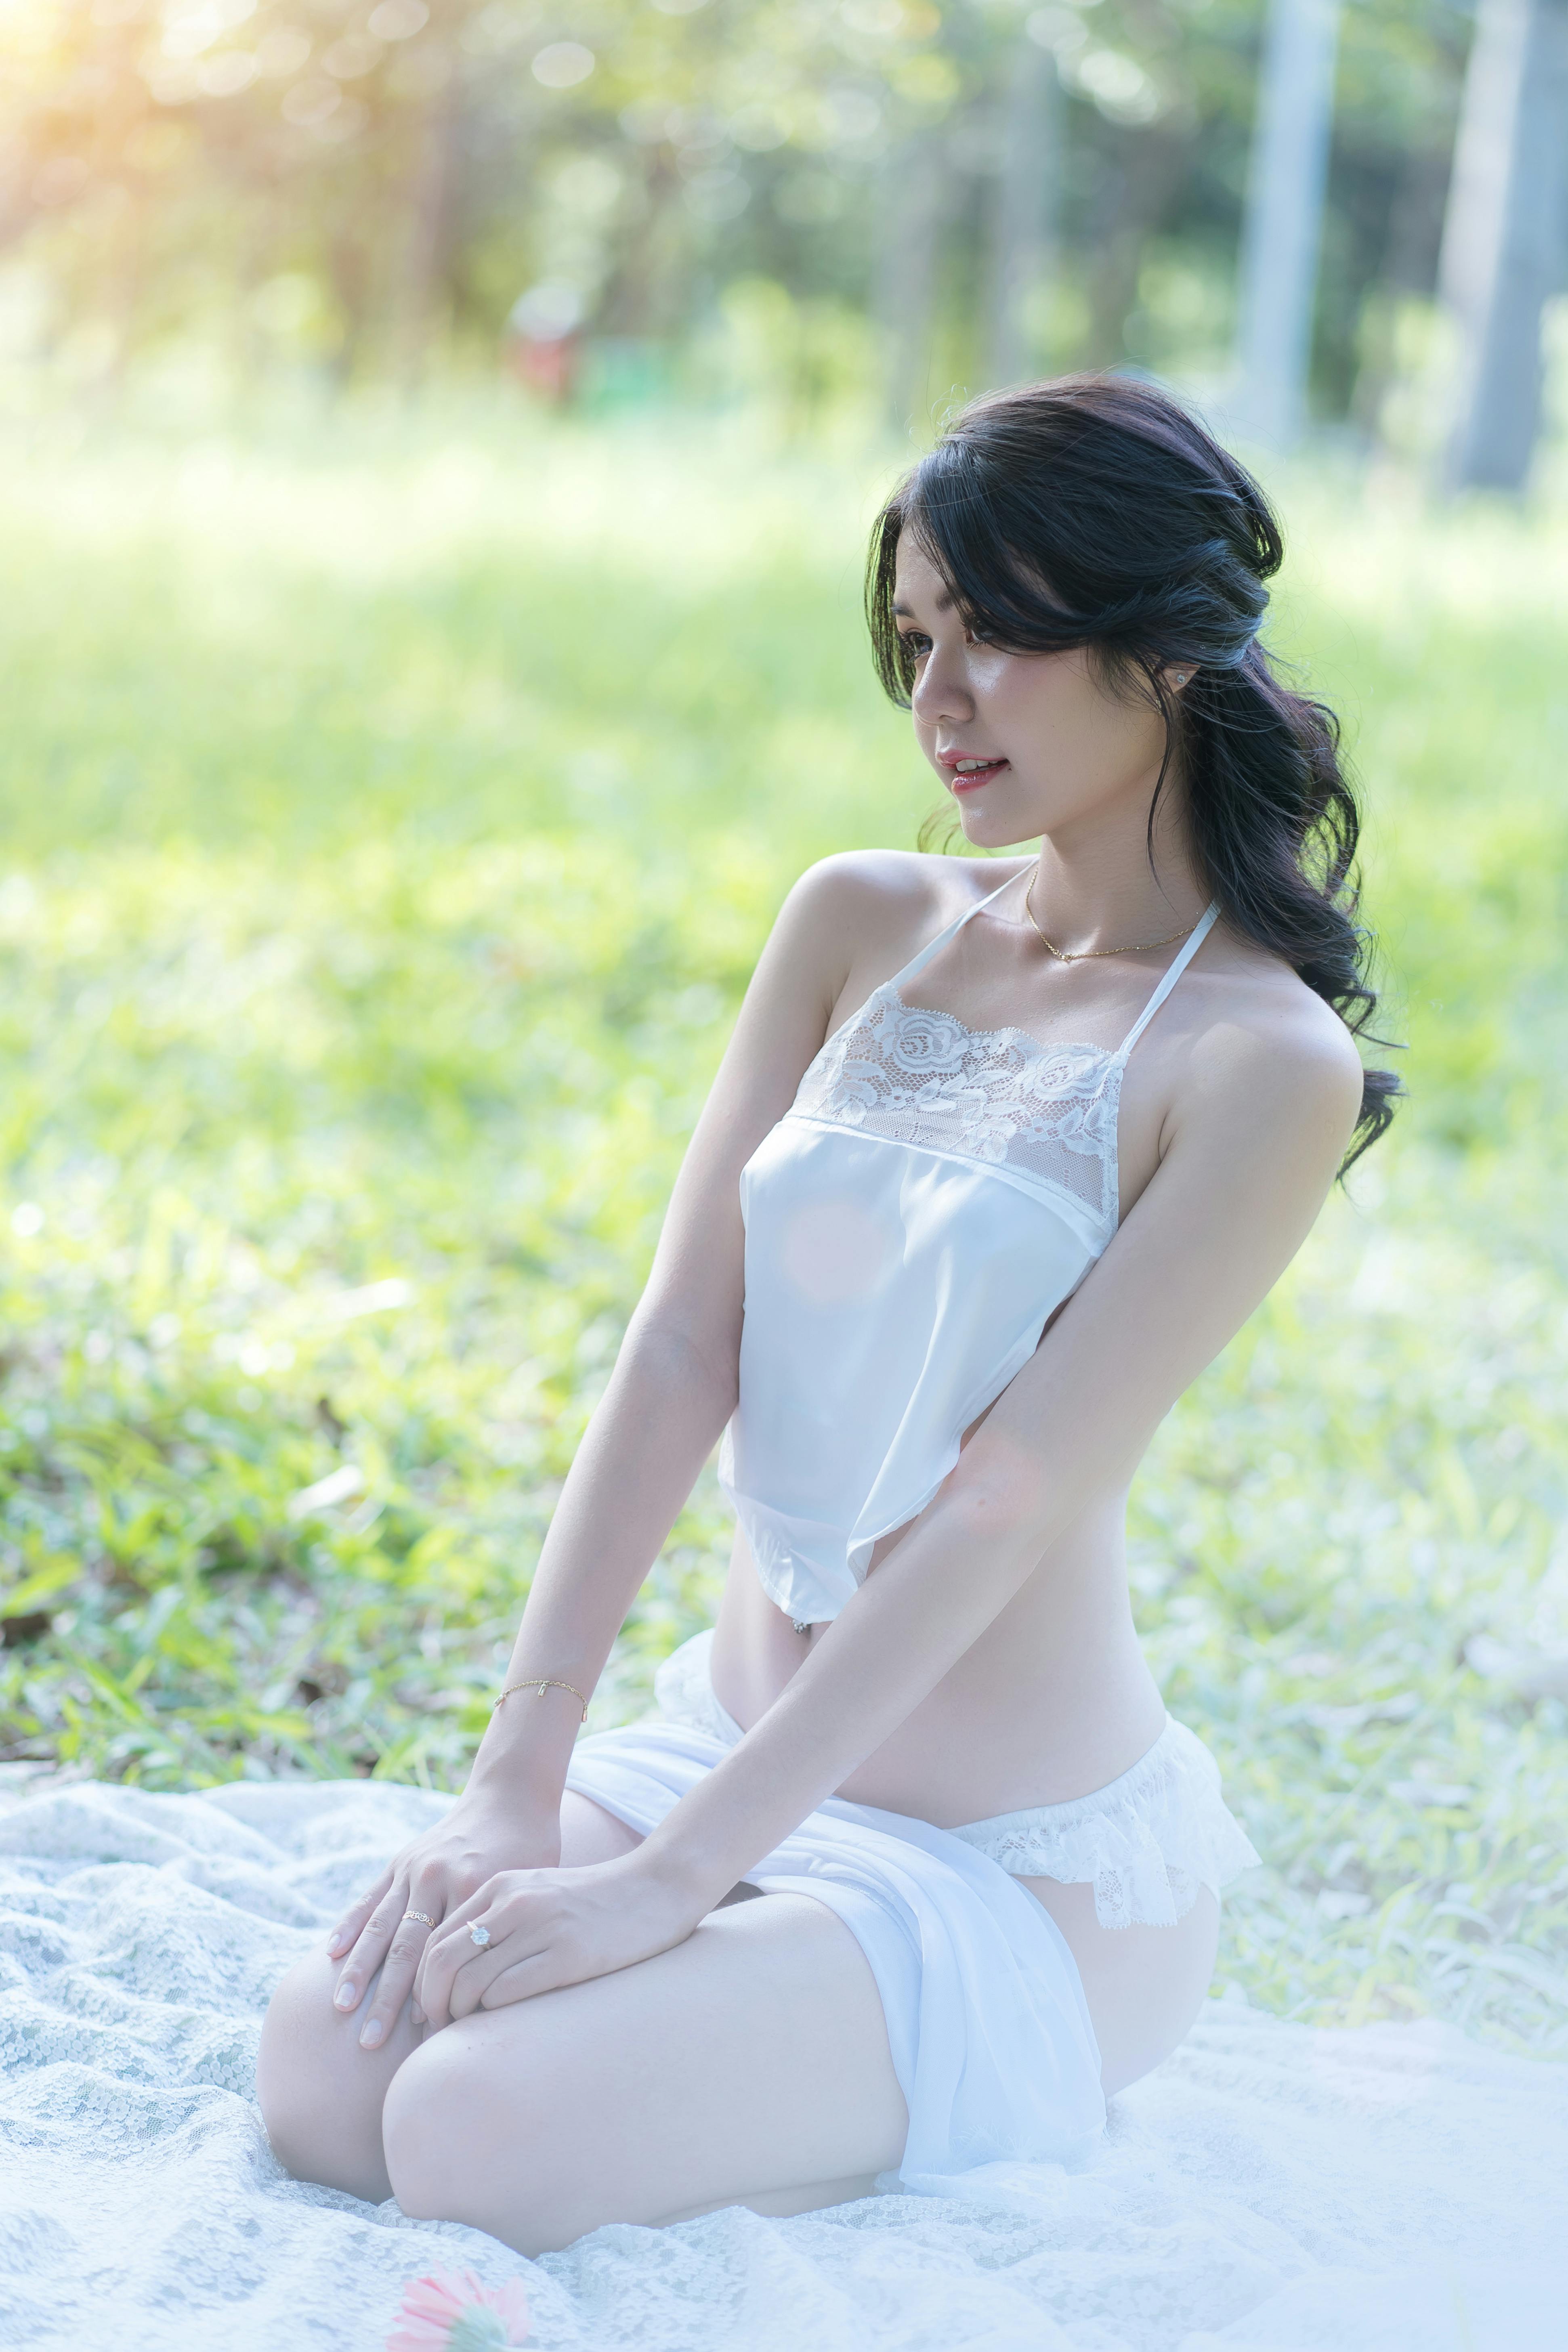 Brunette Woman in Lingerie Sitting at Picnic · Free Stock Photo